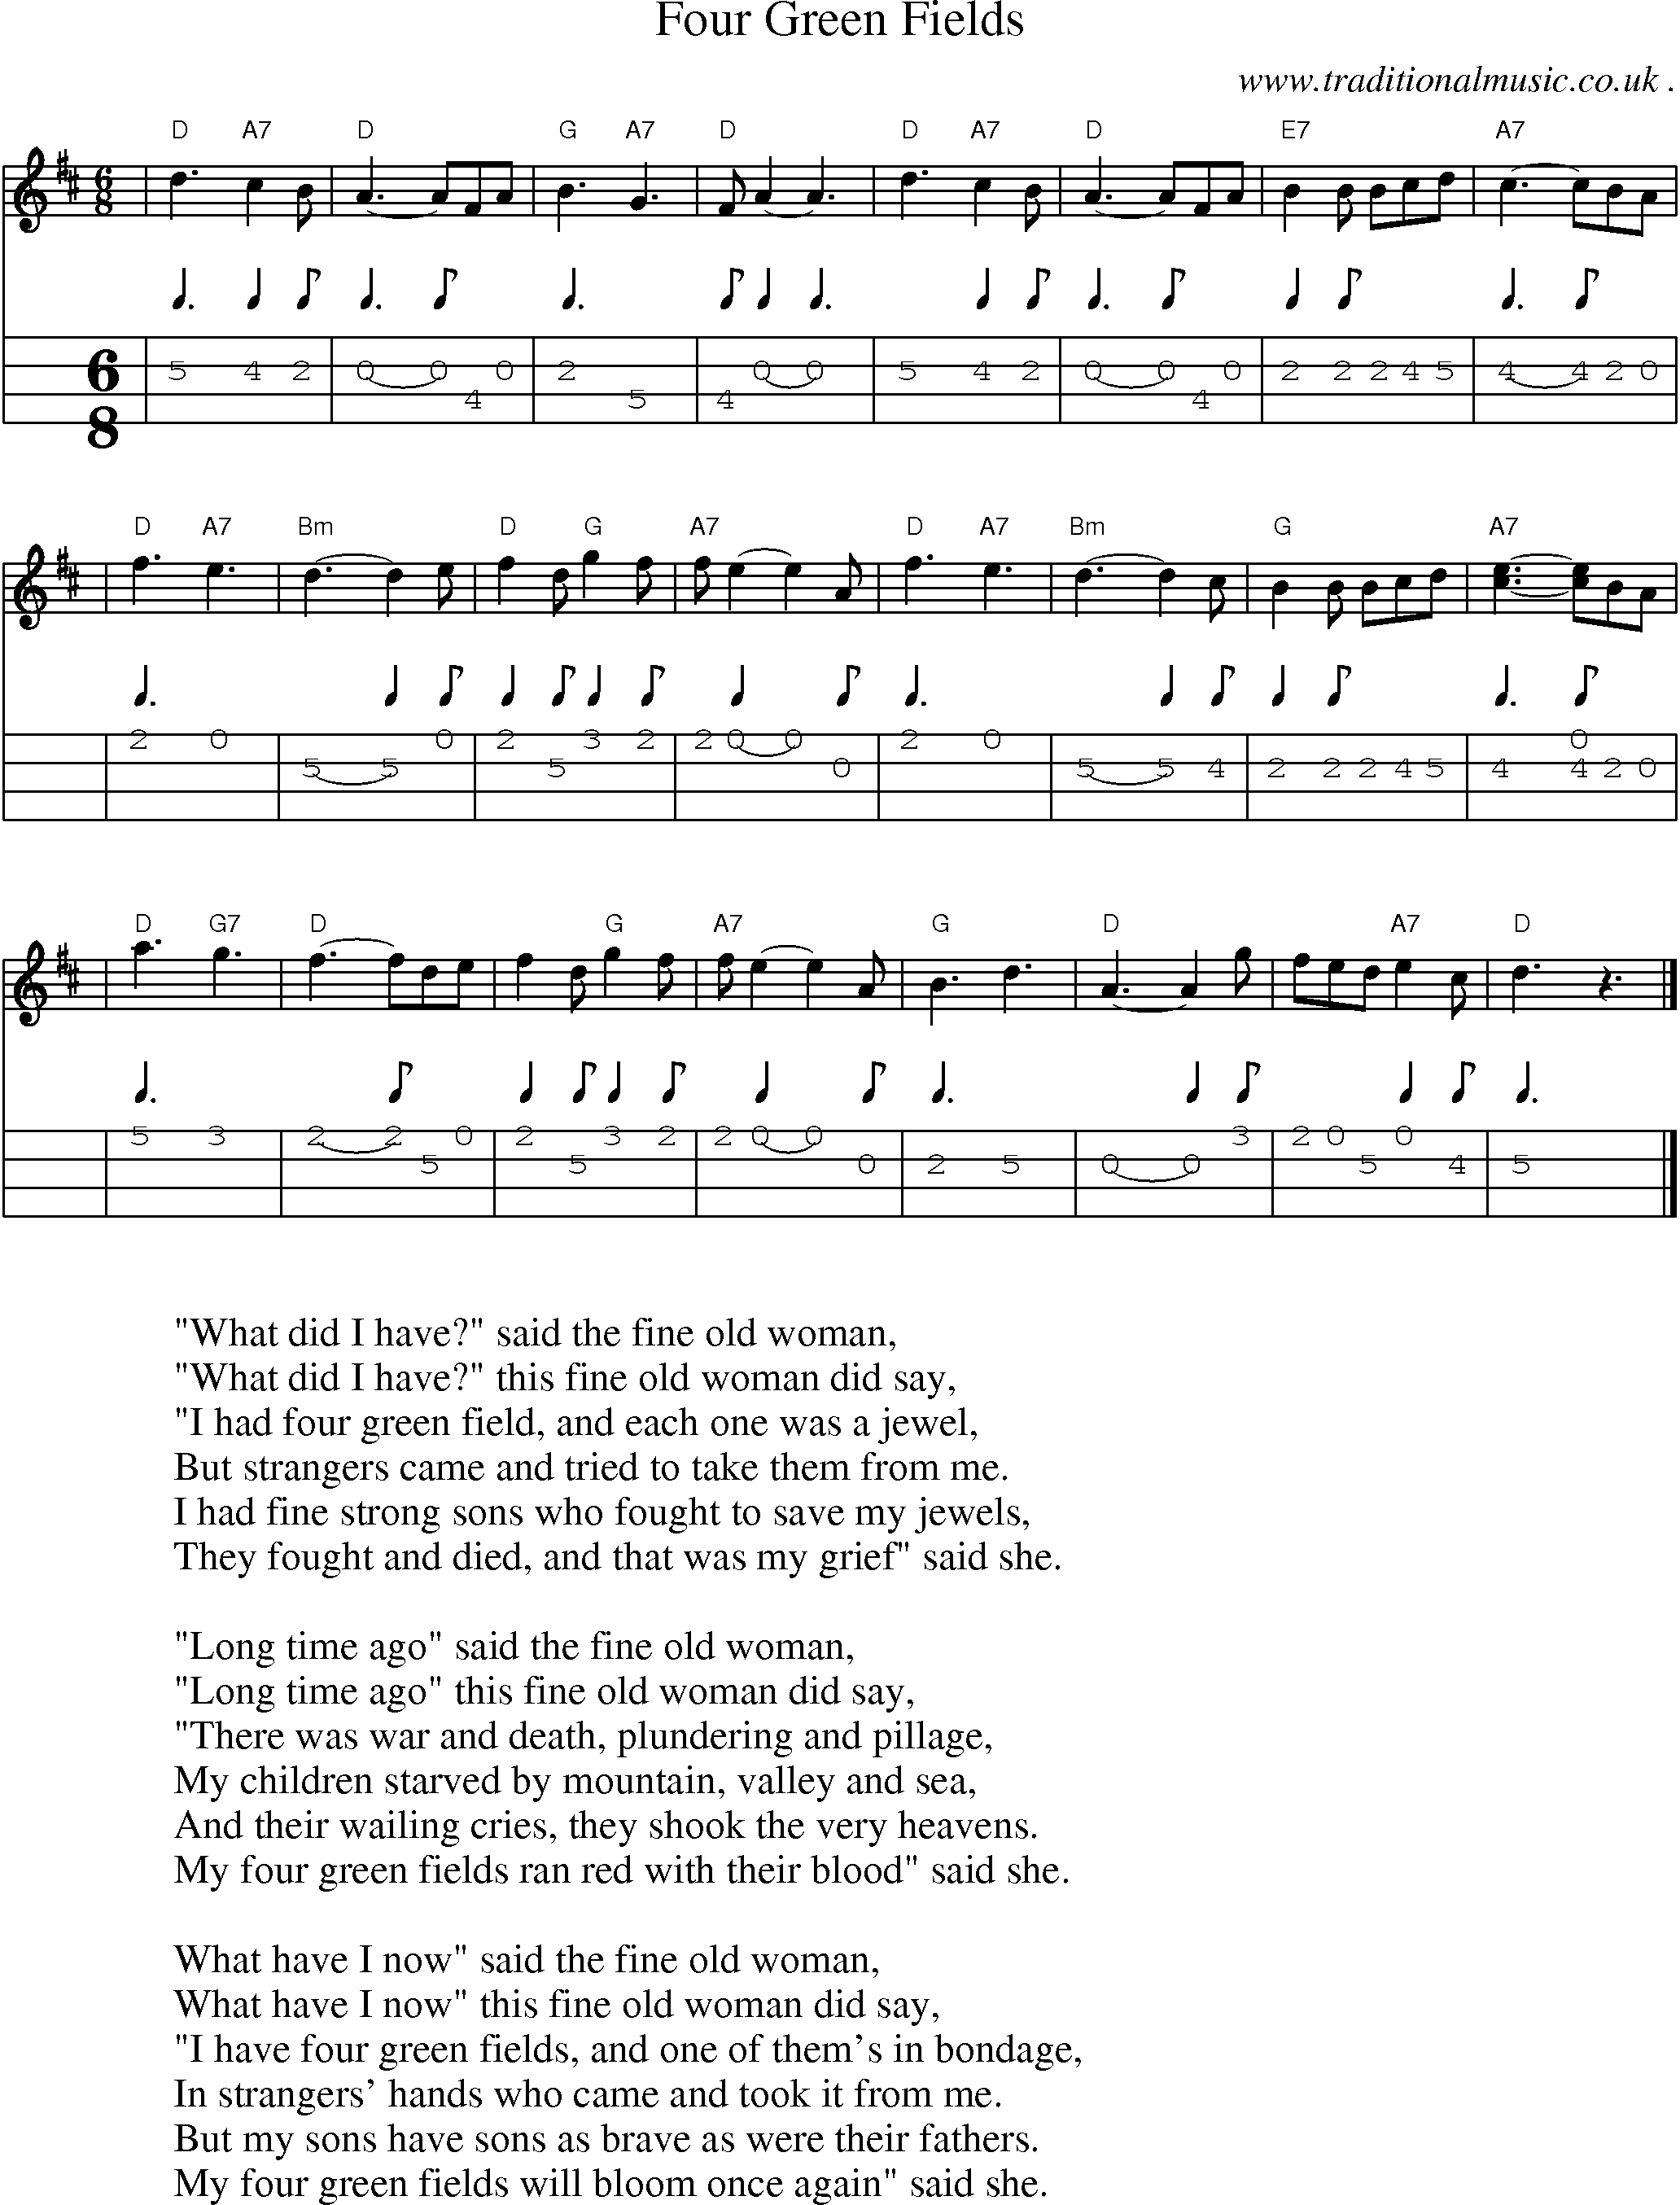 Sheet-music  score, Chords and Mandolin Tabs for Four Green Fields